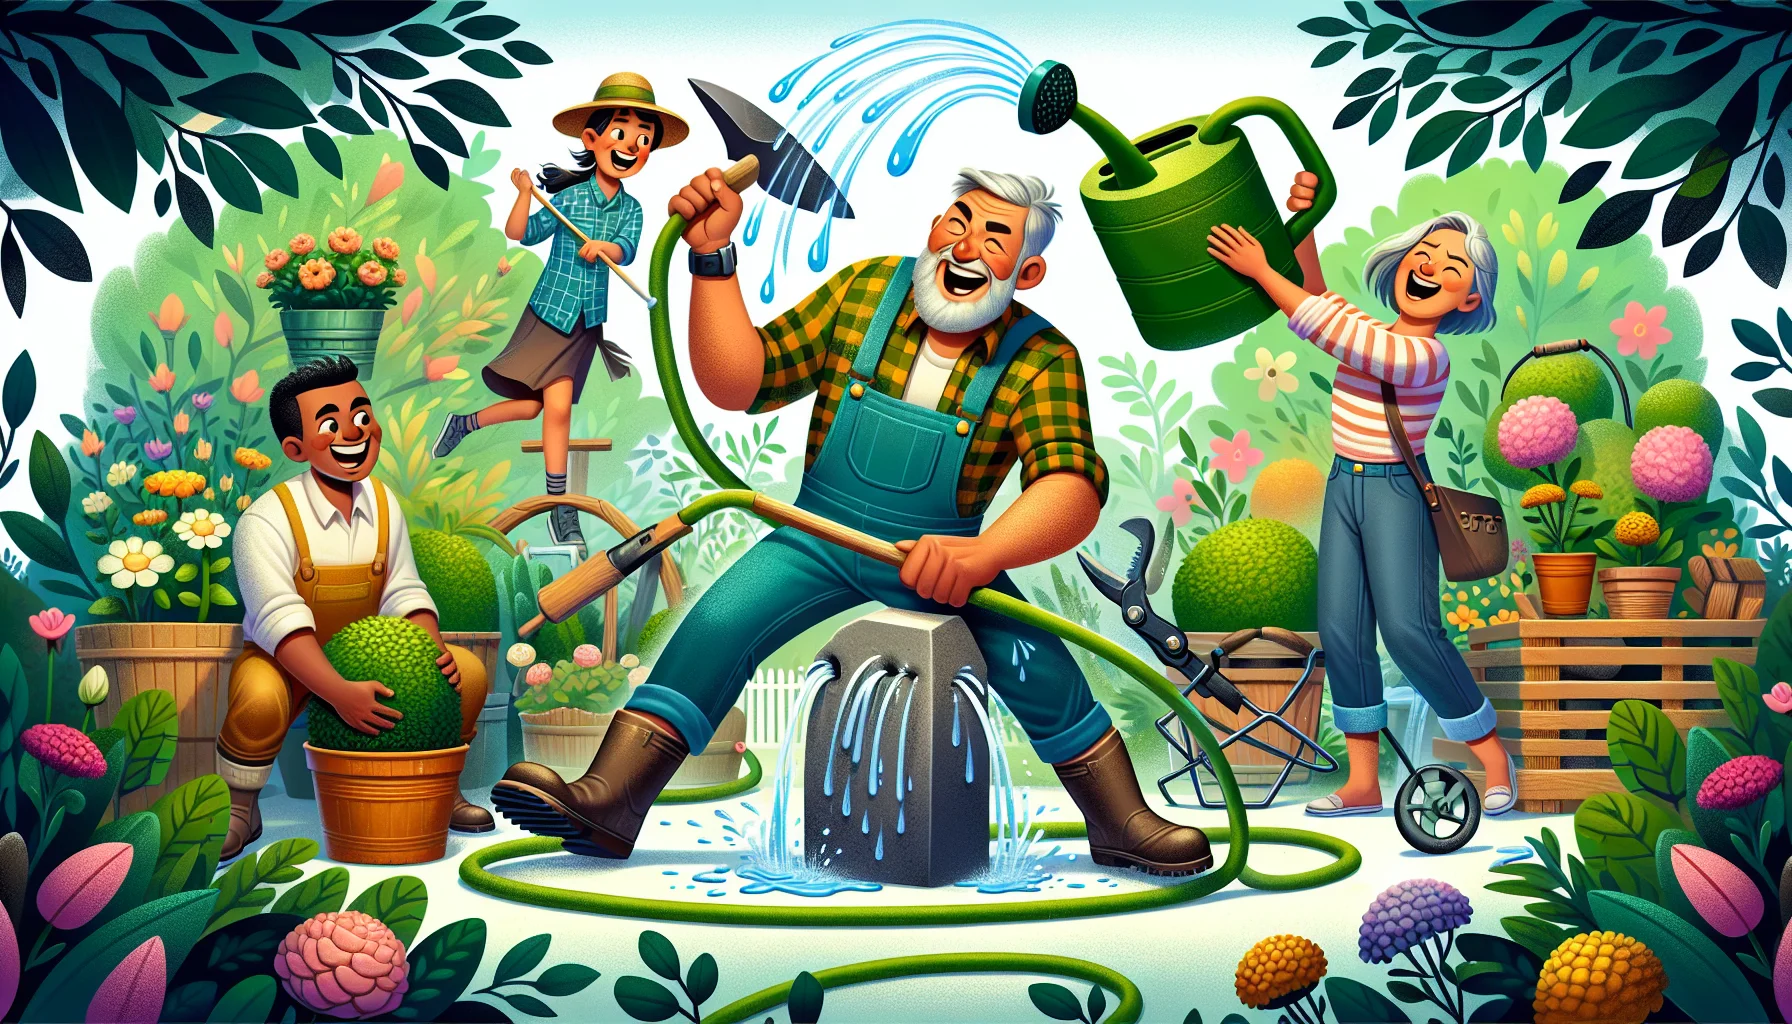 Illustrate a playful scene in a lush, vibrant garden. In the center, a middle-aged Caucasian male farmer is sharpening his garden tools, such as spades, hoes, and pruning shears, with an exaggerated, oversized whetstone. Next to him, a young, South Asian girl is holding a watering can twice her size, grinning as she struggles to lift it. An older, Black woman is laughing while wrestling with a rebellious garden hose that sprays water in random directions. To add fun elements, include a Hispanic male teen trying to balance a stack of flower pots on his head. This image encapsulates the joyful, adventurous spirit of gardening.